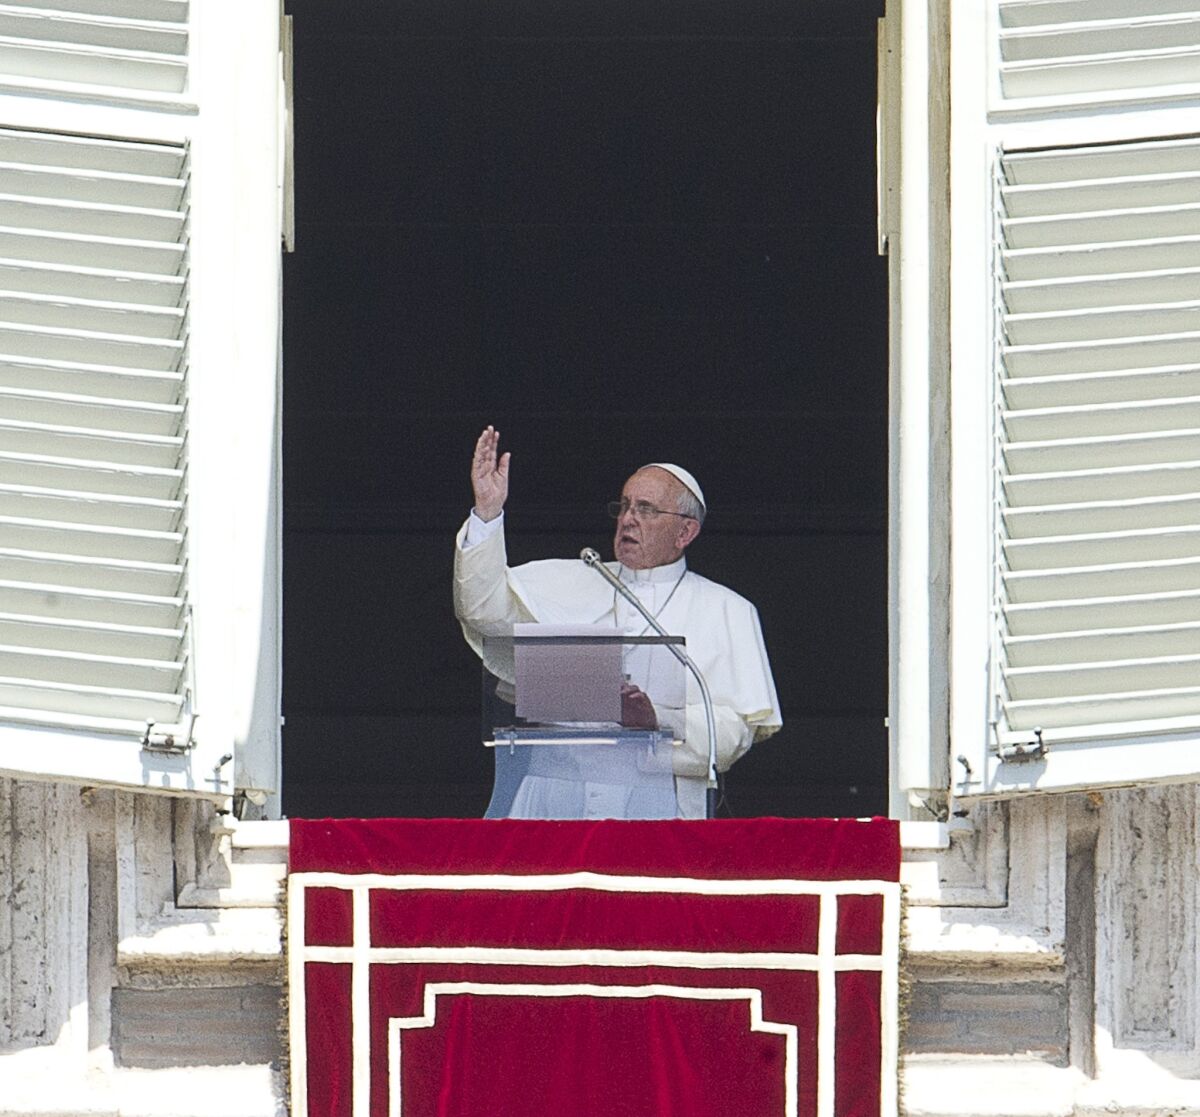 Pope Francis gives the Angelus prayer from the window of the apartments at St Peter's square on at the Vatican.